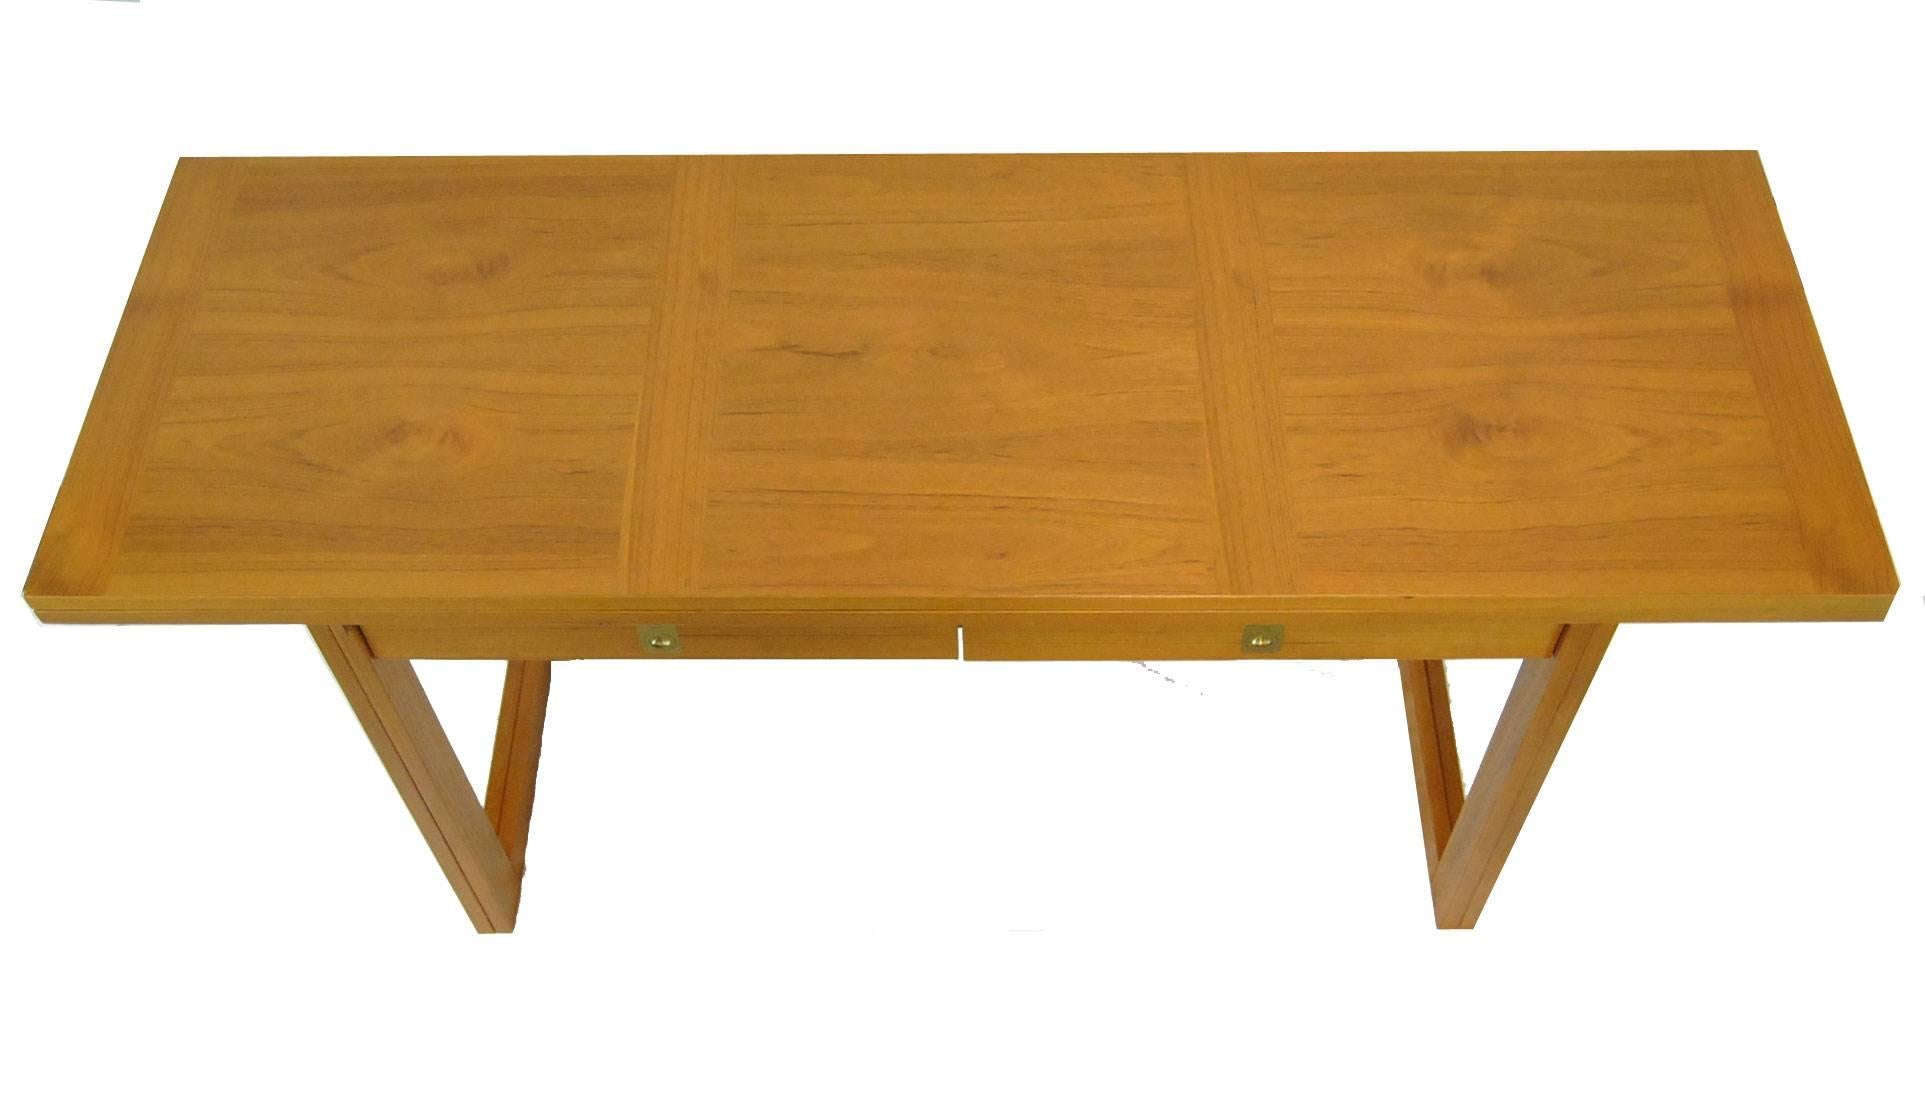 This is a great Danish table for areas with space constraints. The desk with two dovetailed drawers is only 69